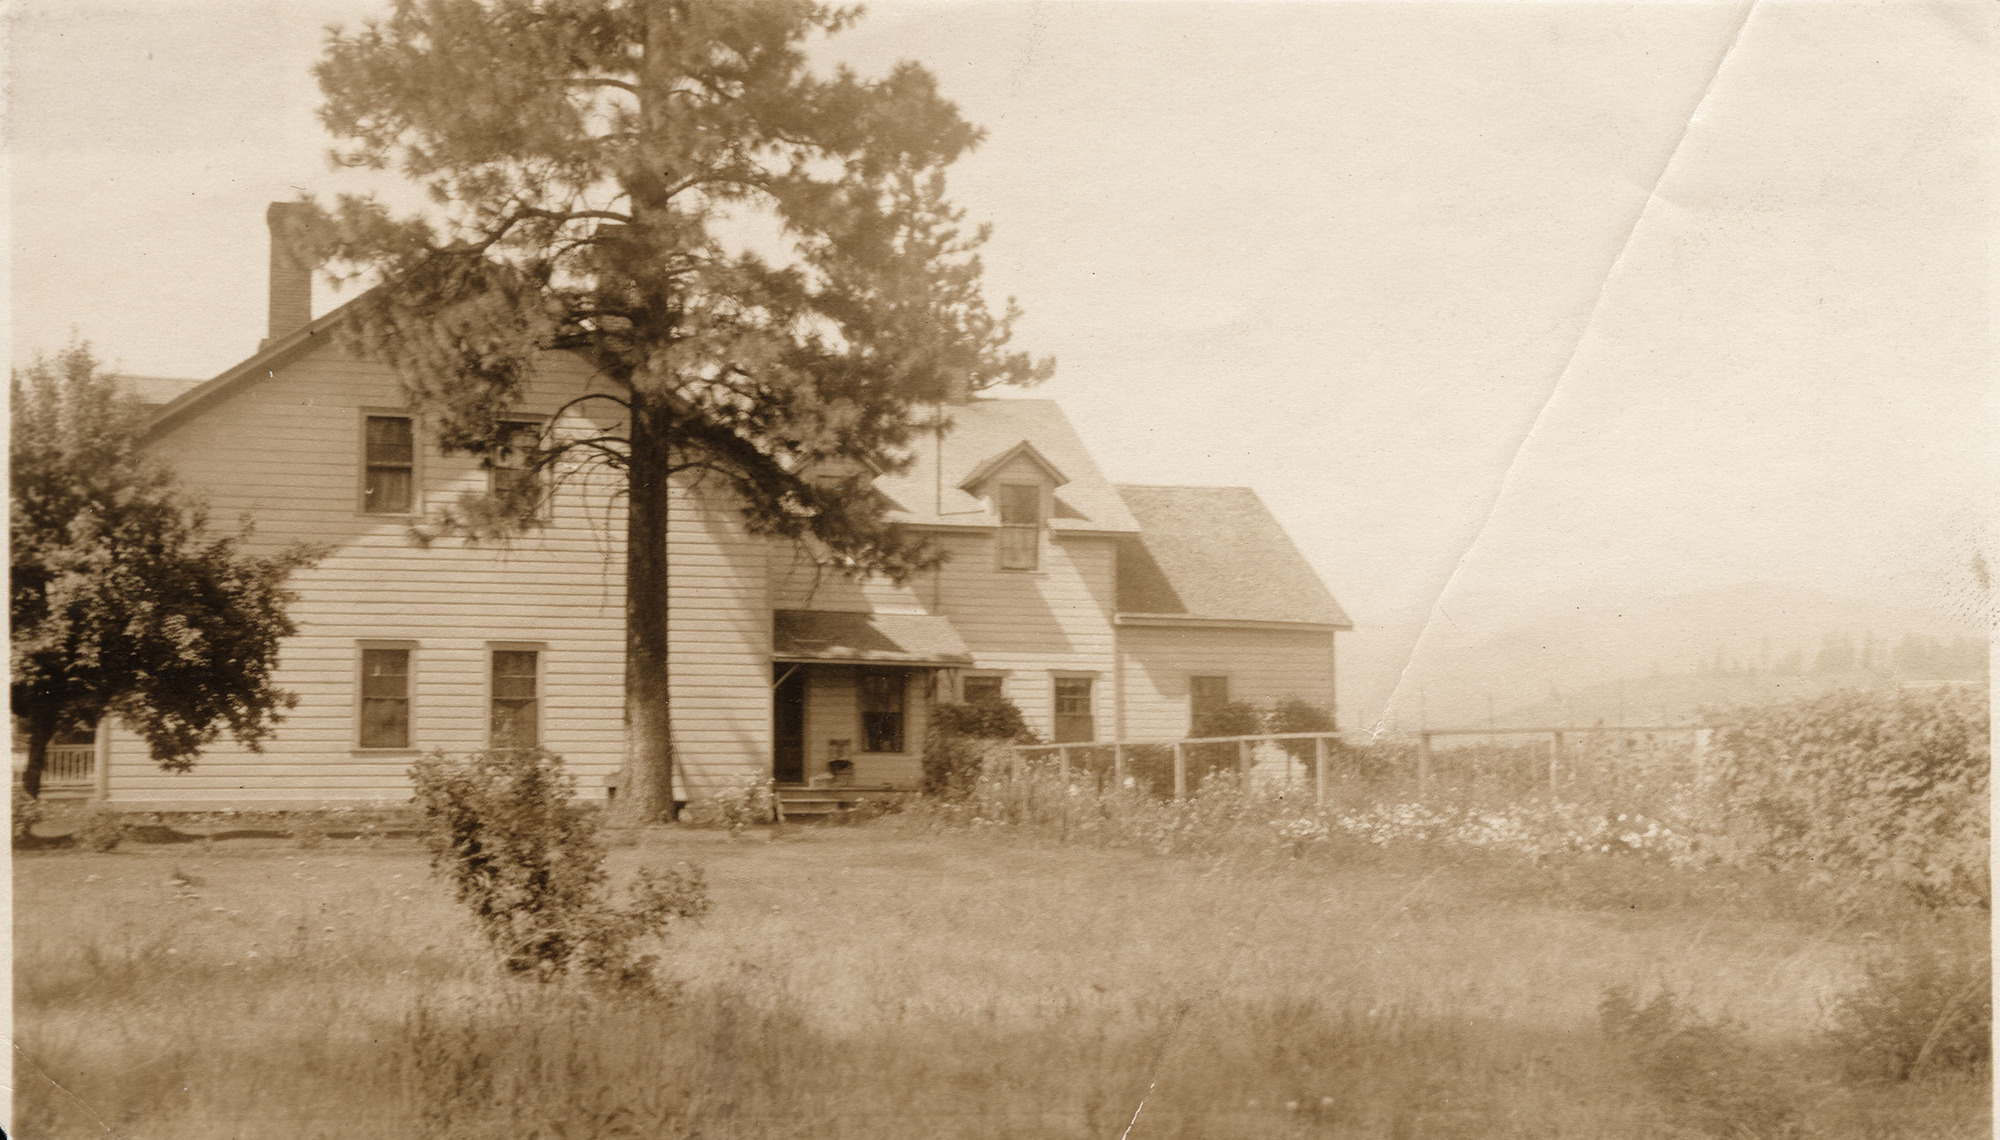 Sepia toned photograph of a multistory house with a fenced yard